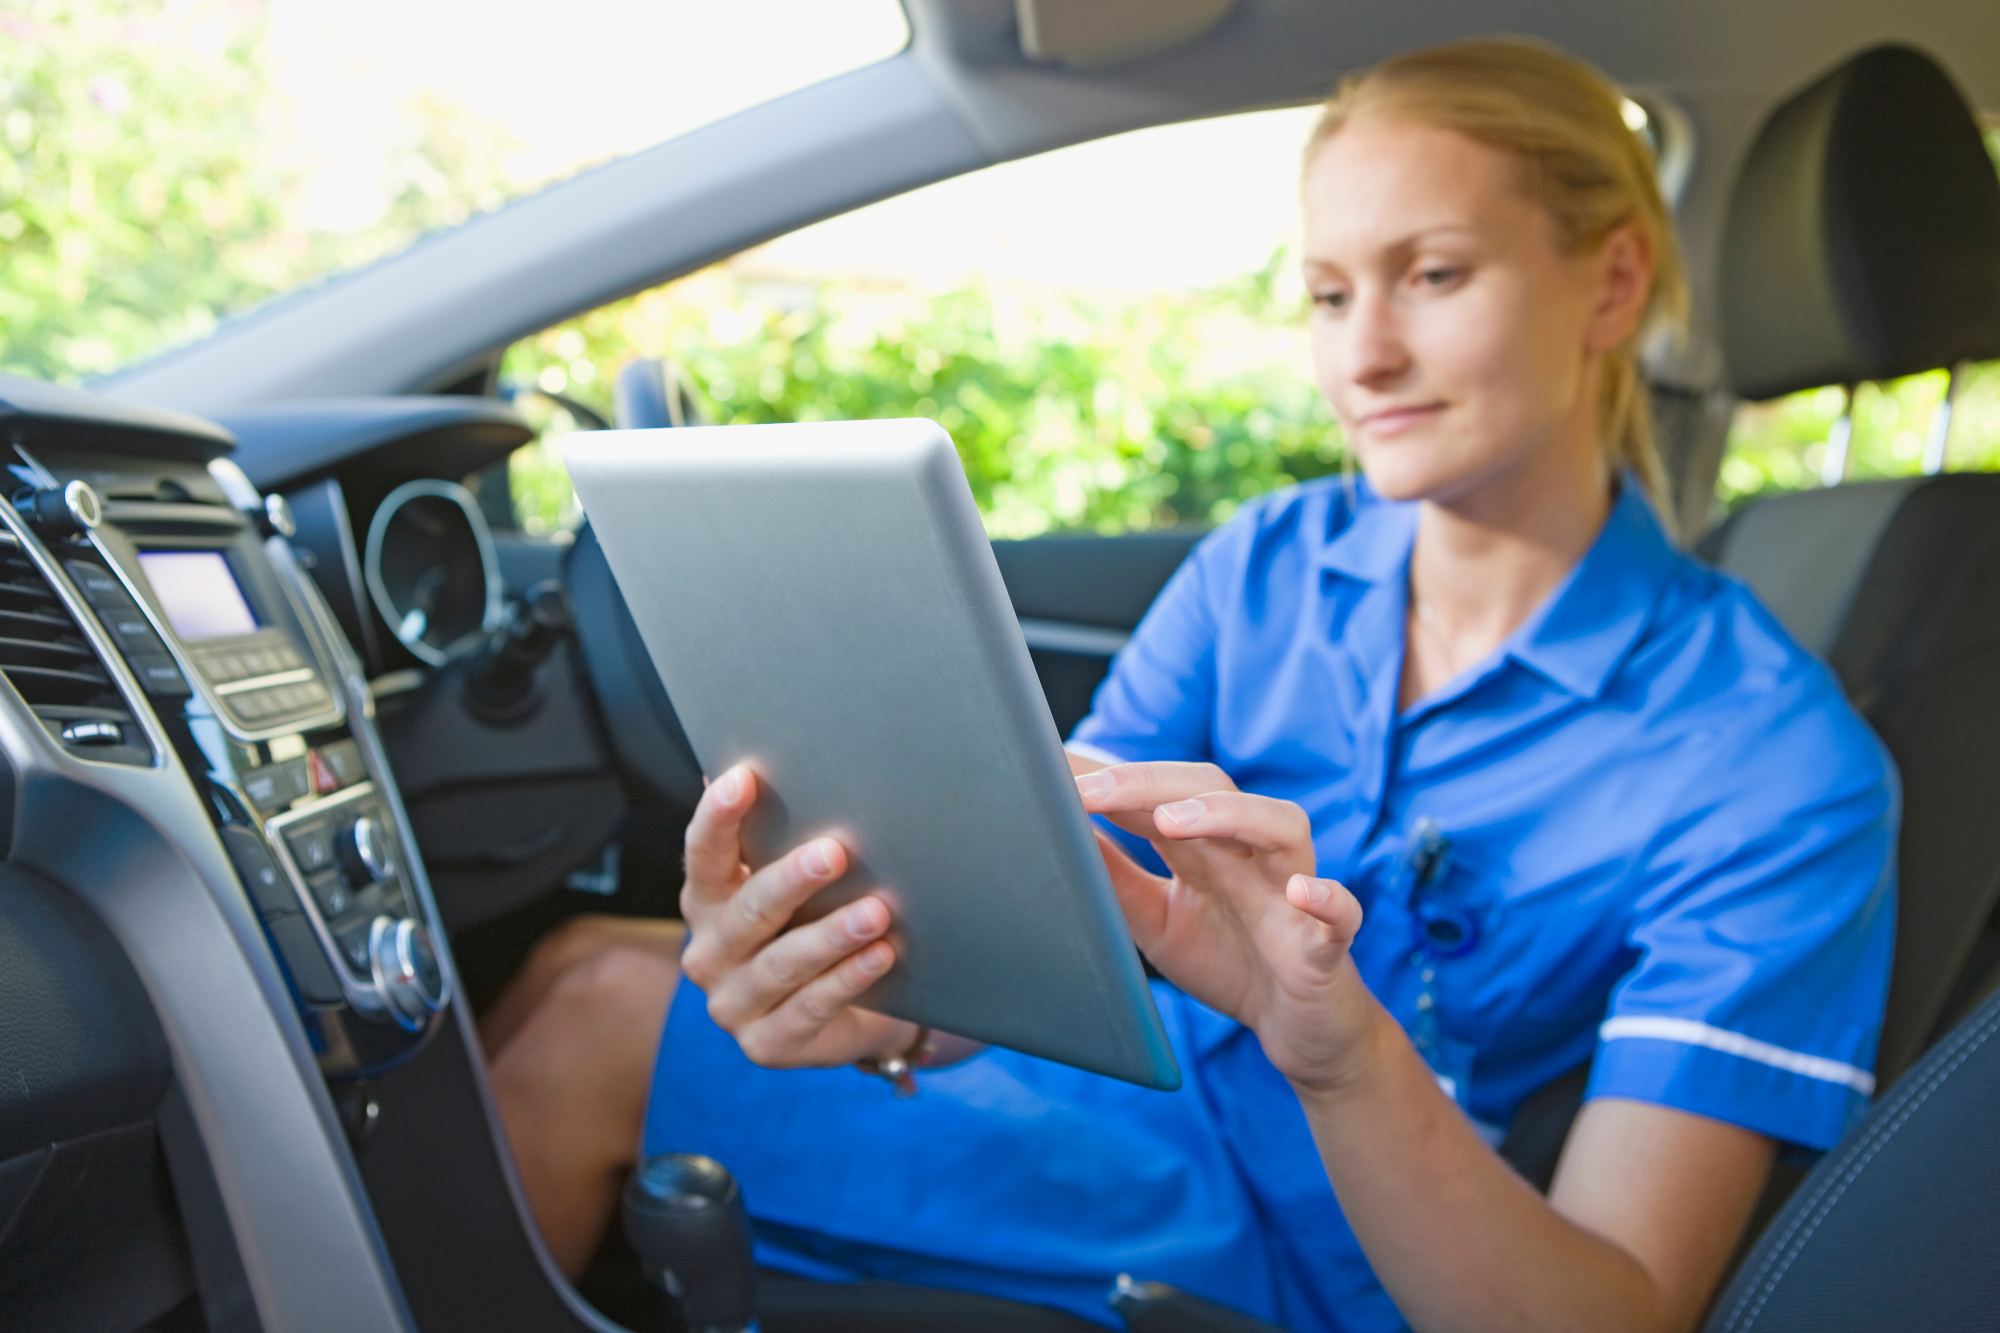 A community nurse looking at tablet in her car